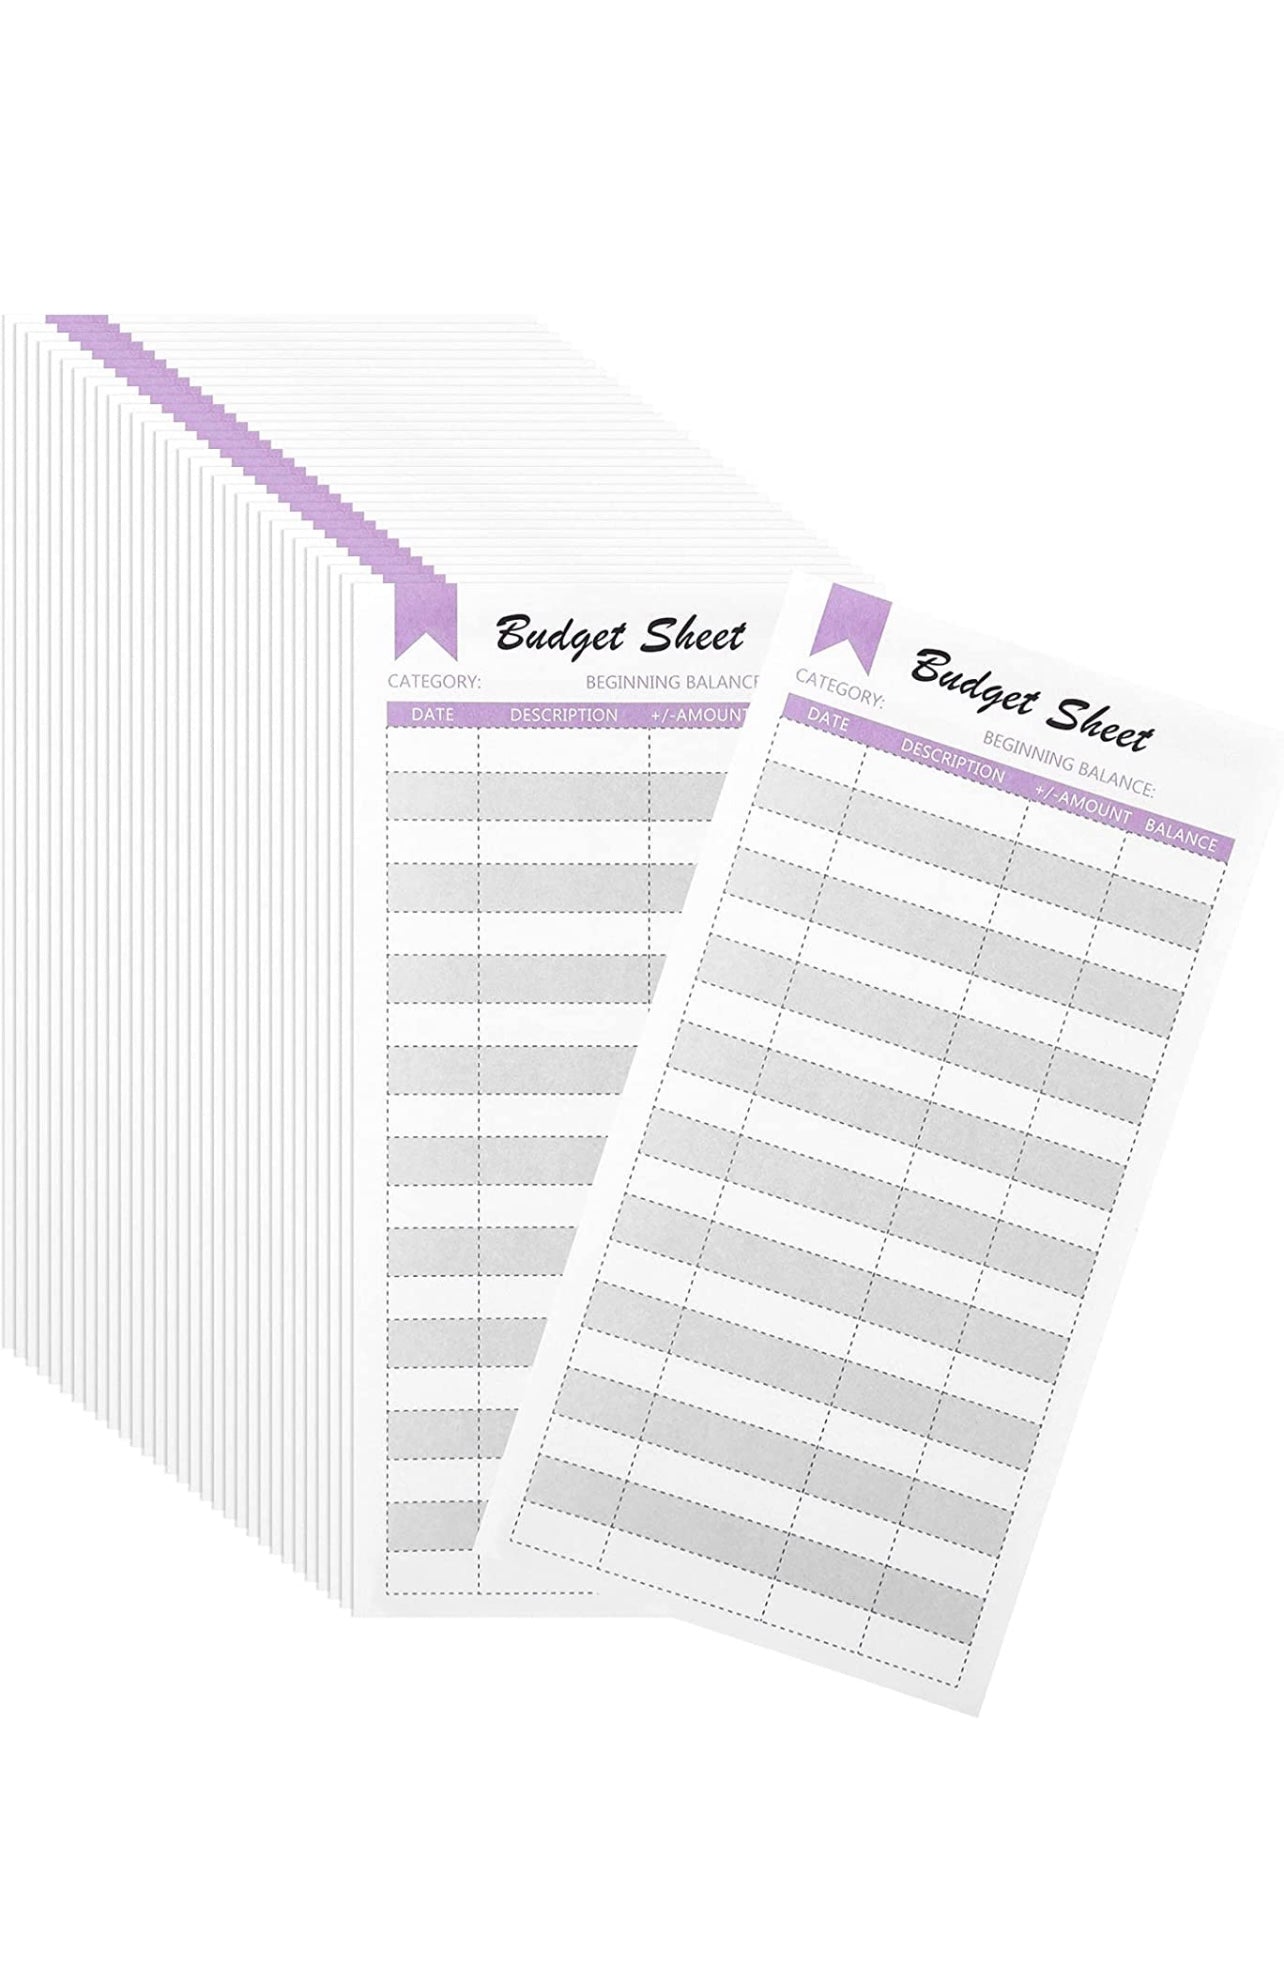 ADD ON BUDGET SHEETS